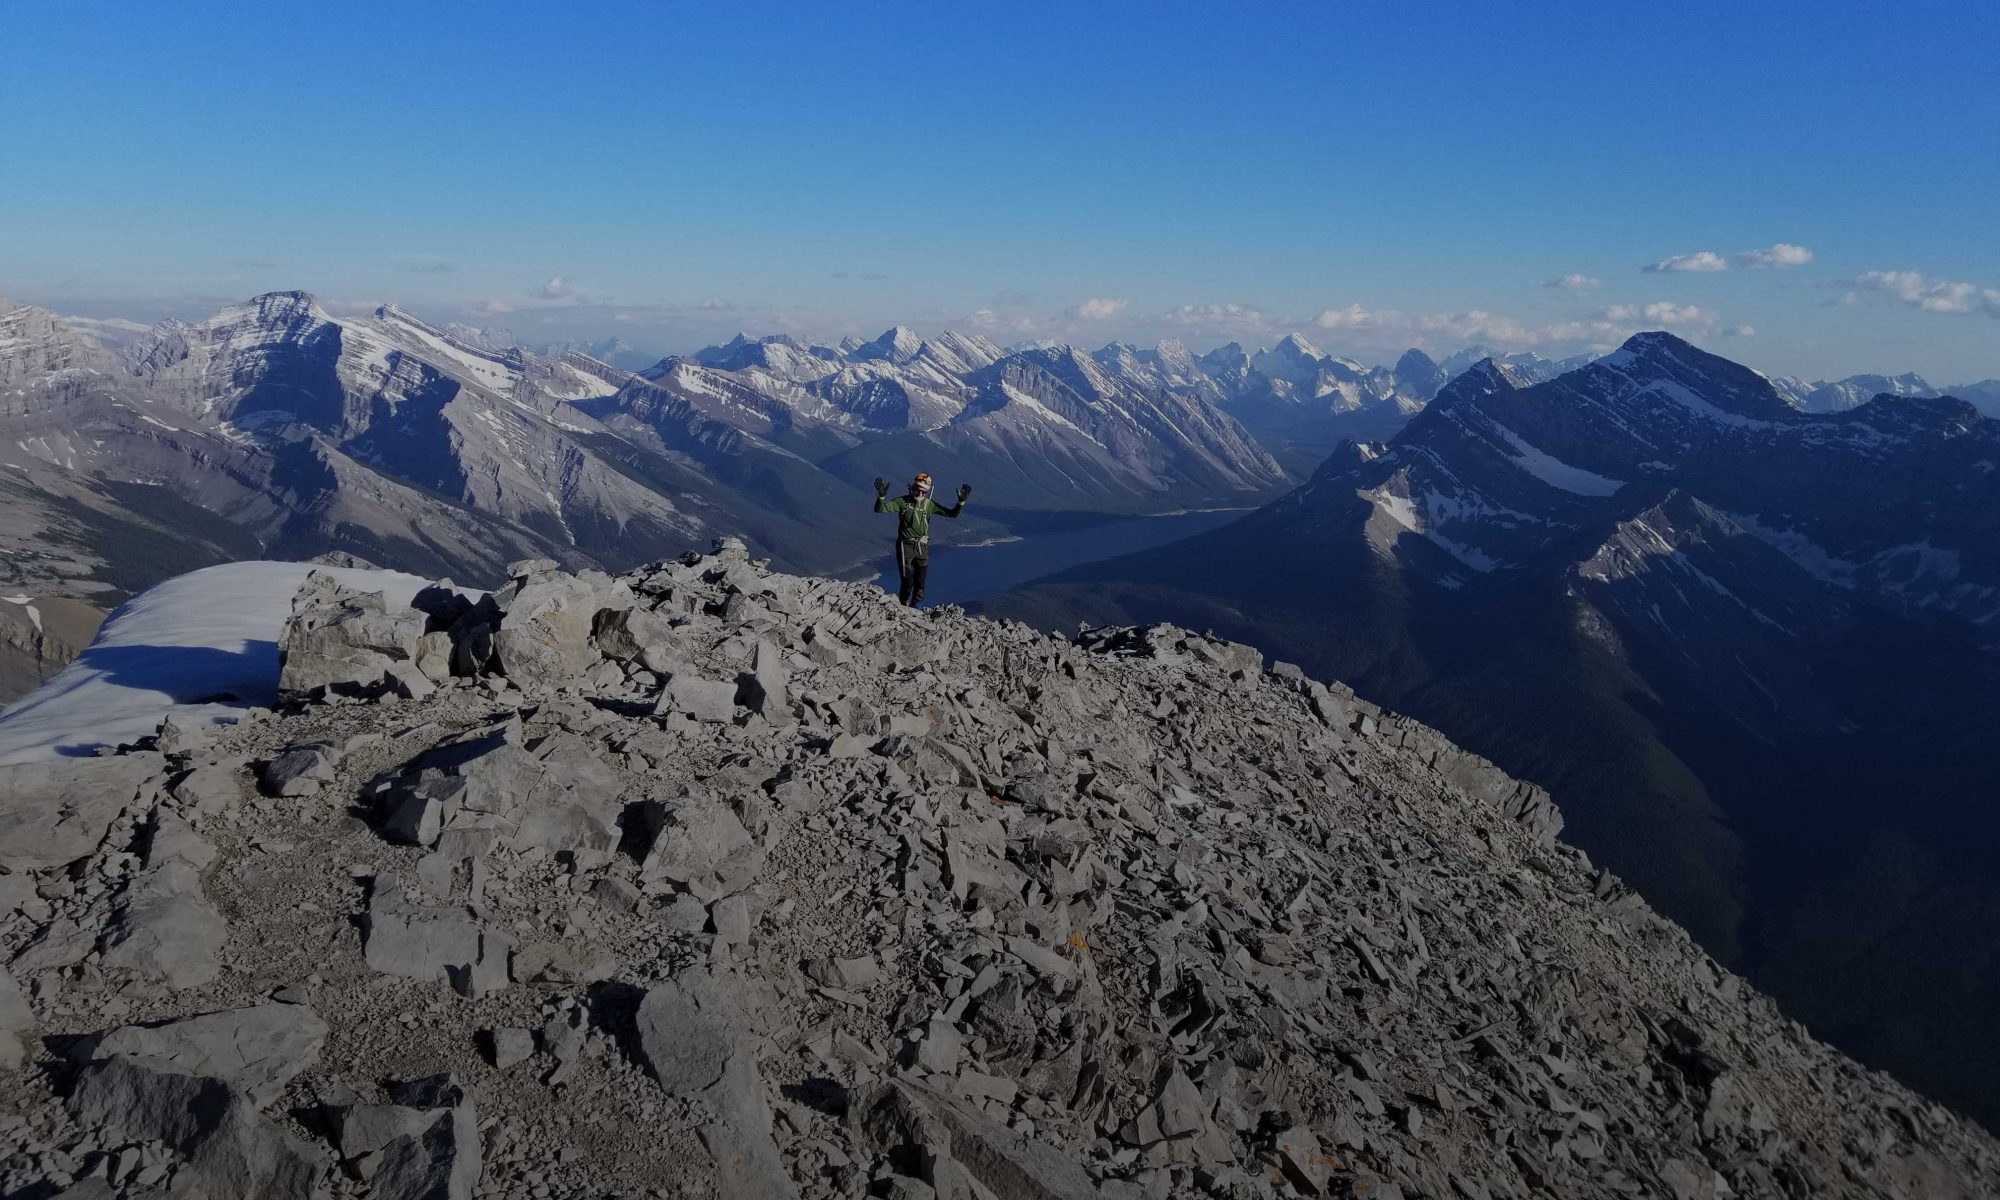 Canadian Scrambling and Mountaineering (CSMC)